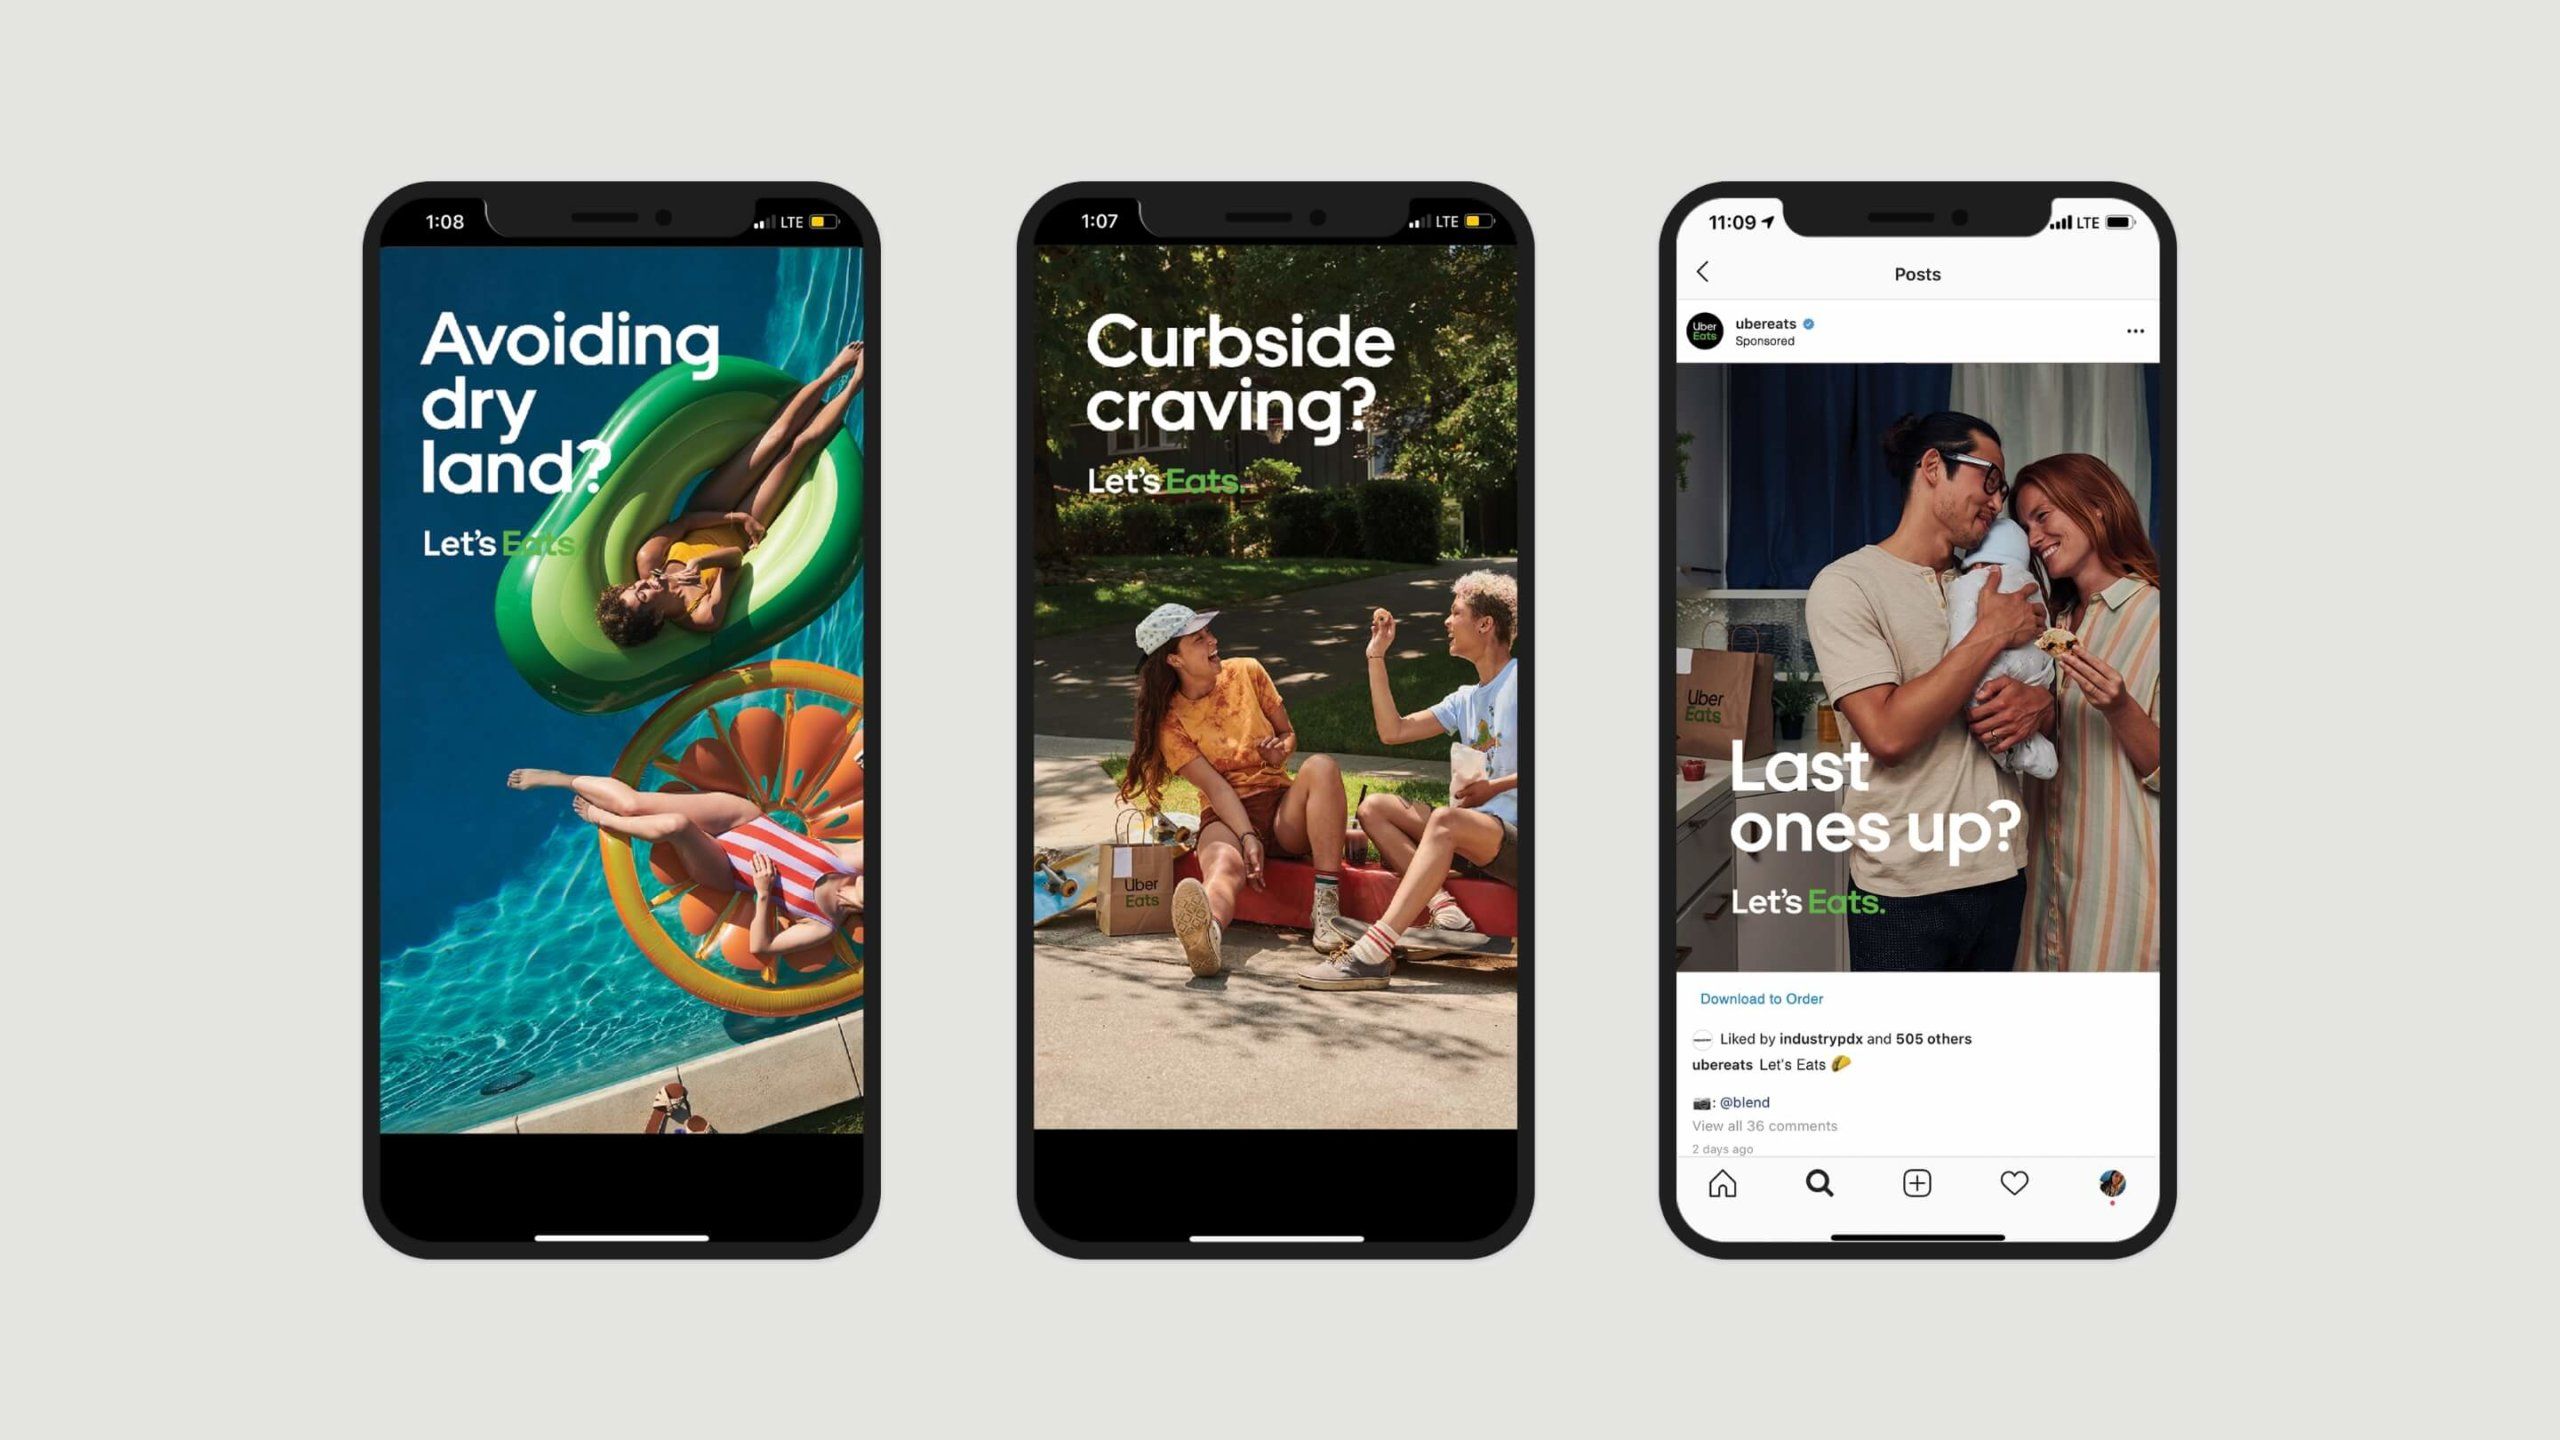 Three phones showing instagram stories and post. Avoiding dry land? Cubside craving? Last ones up? Uber Eats